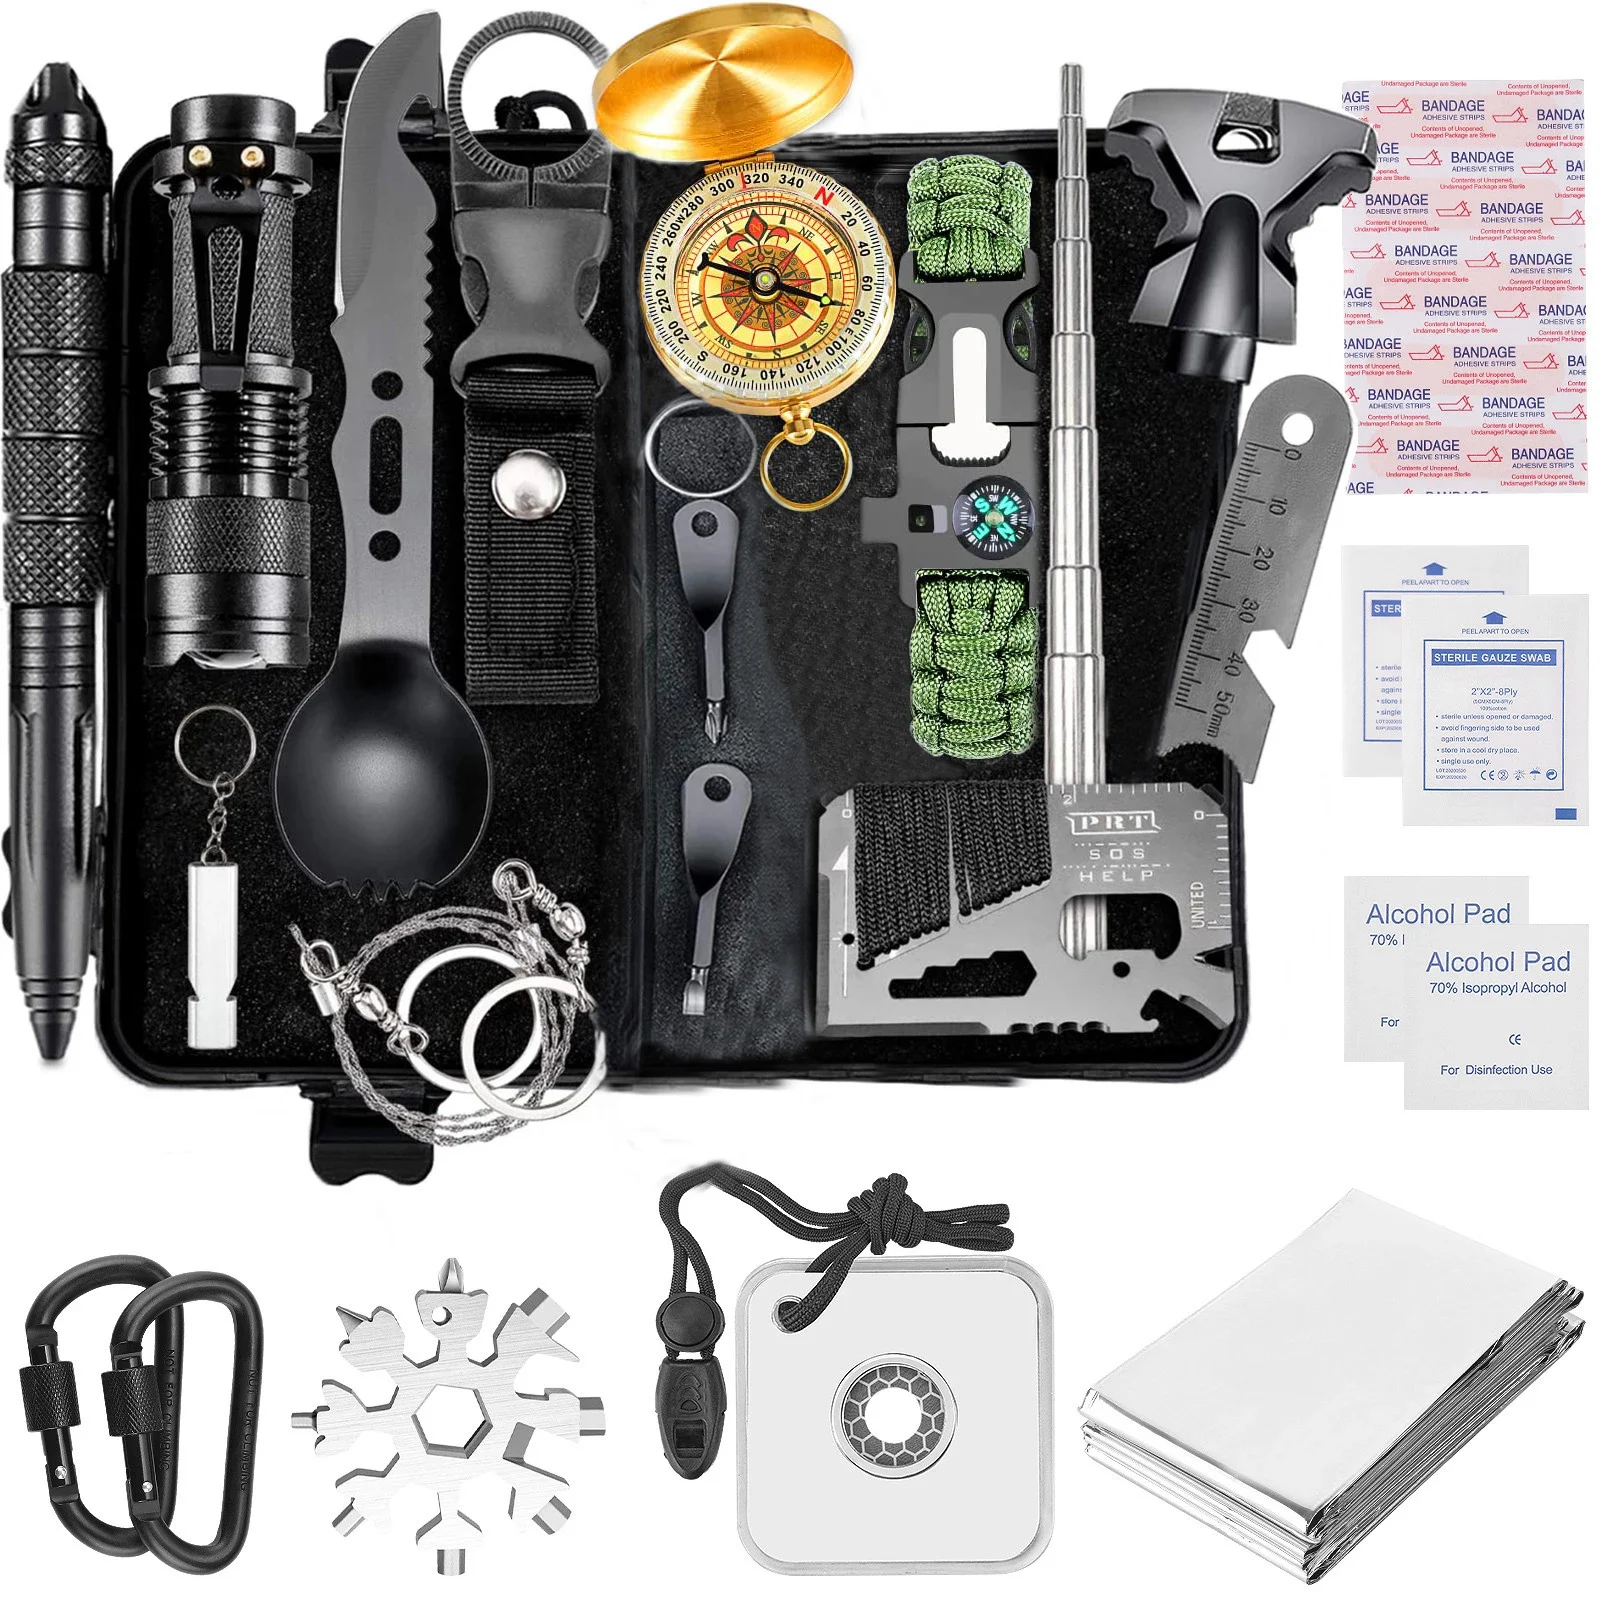 Survival Gear and Equipment kit 22 in 1 Professional Tactical Gadgets Stuff - $70.24+